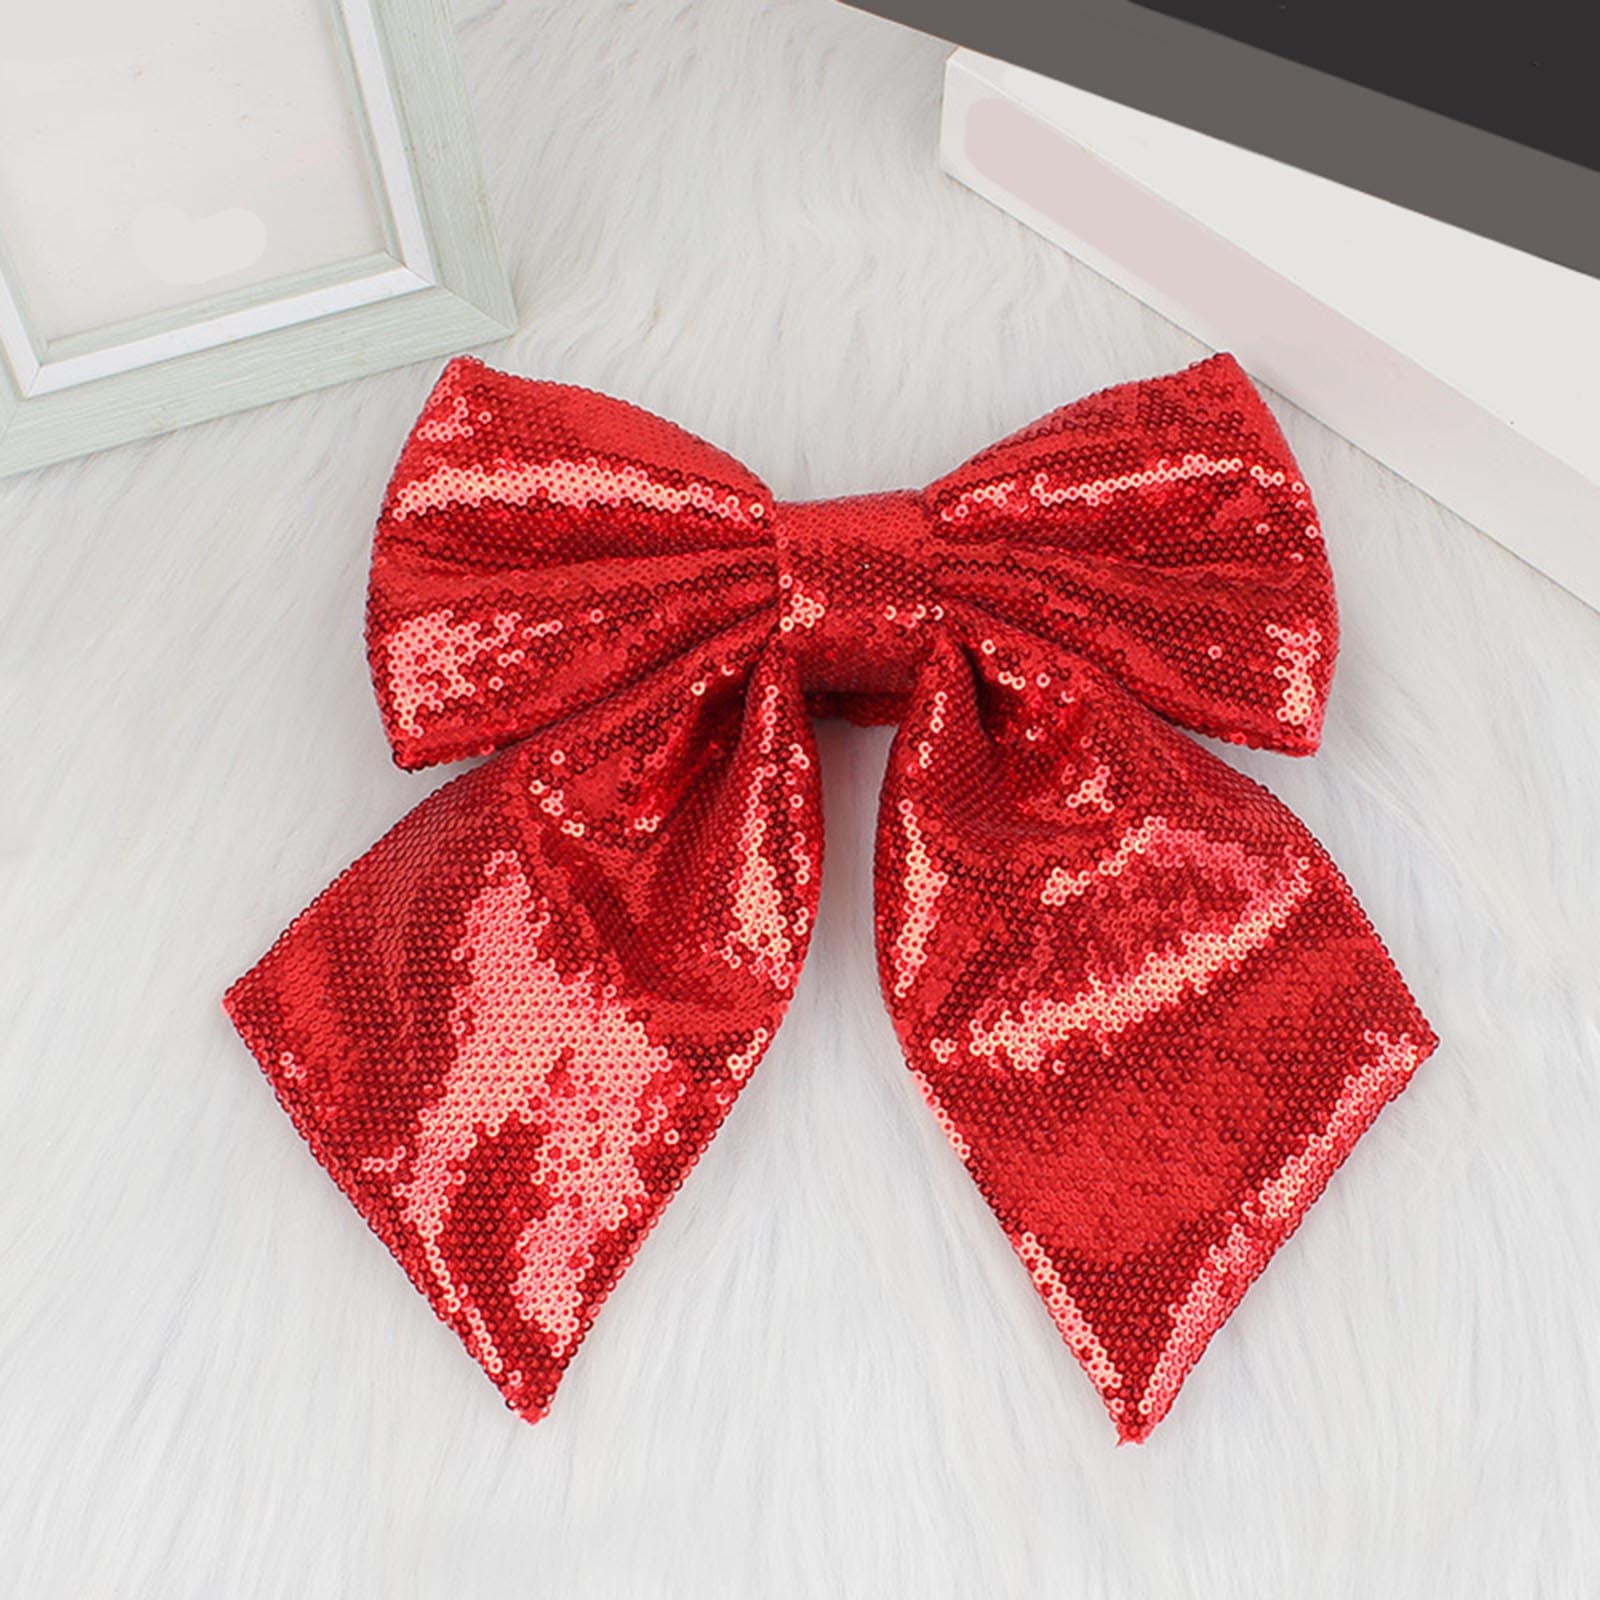 Hand tied Bows - Wired Indoor Outdoor Brown Velvet Bow 8 Inch